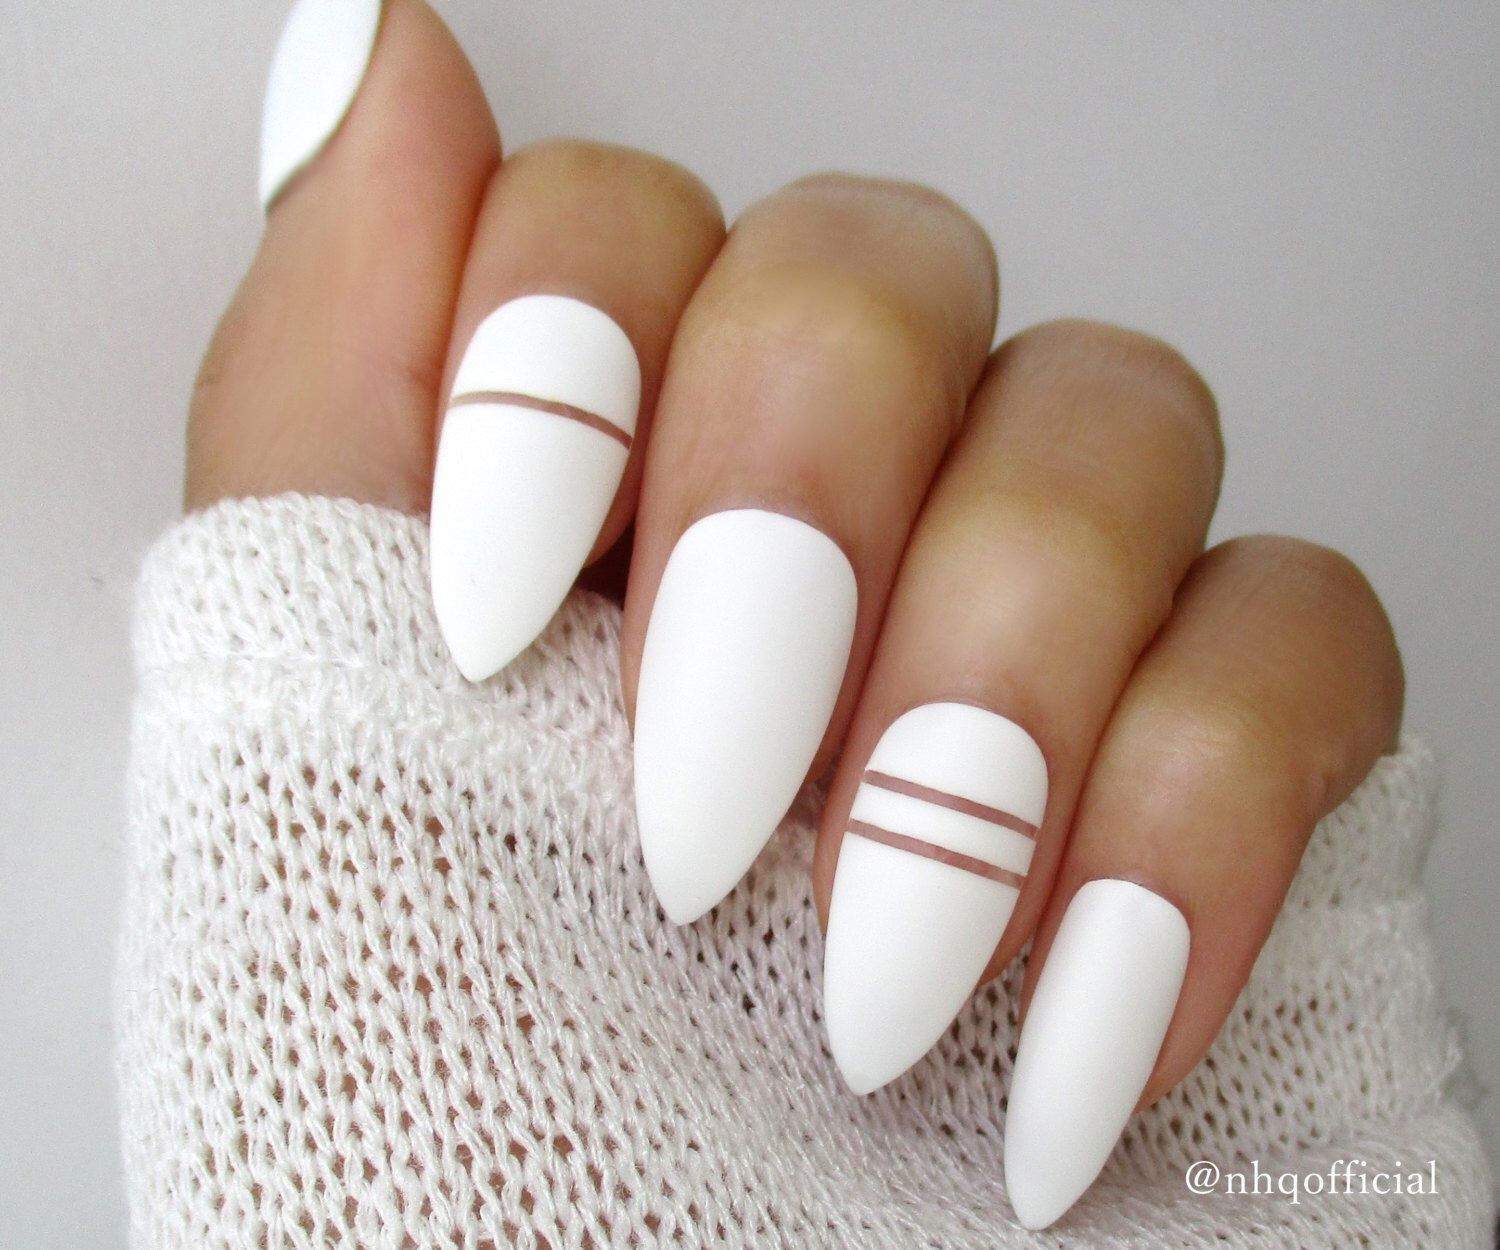 White Matte Stiletto Nails Almond Nails Fake Nails Press On Nails Negative Space By Nhqofficial On Etsy Https Www Et Bile Nehty Gelove Nehty